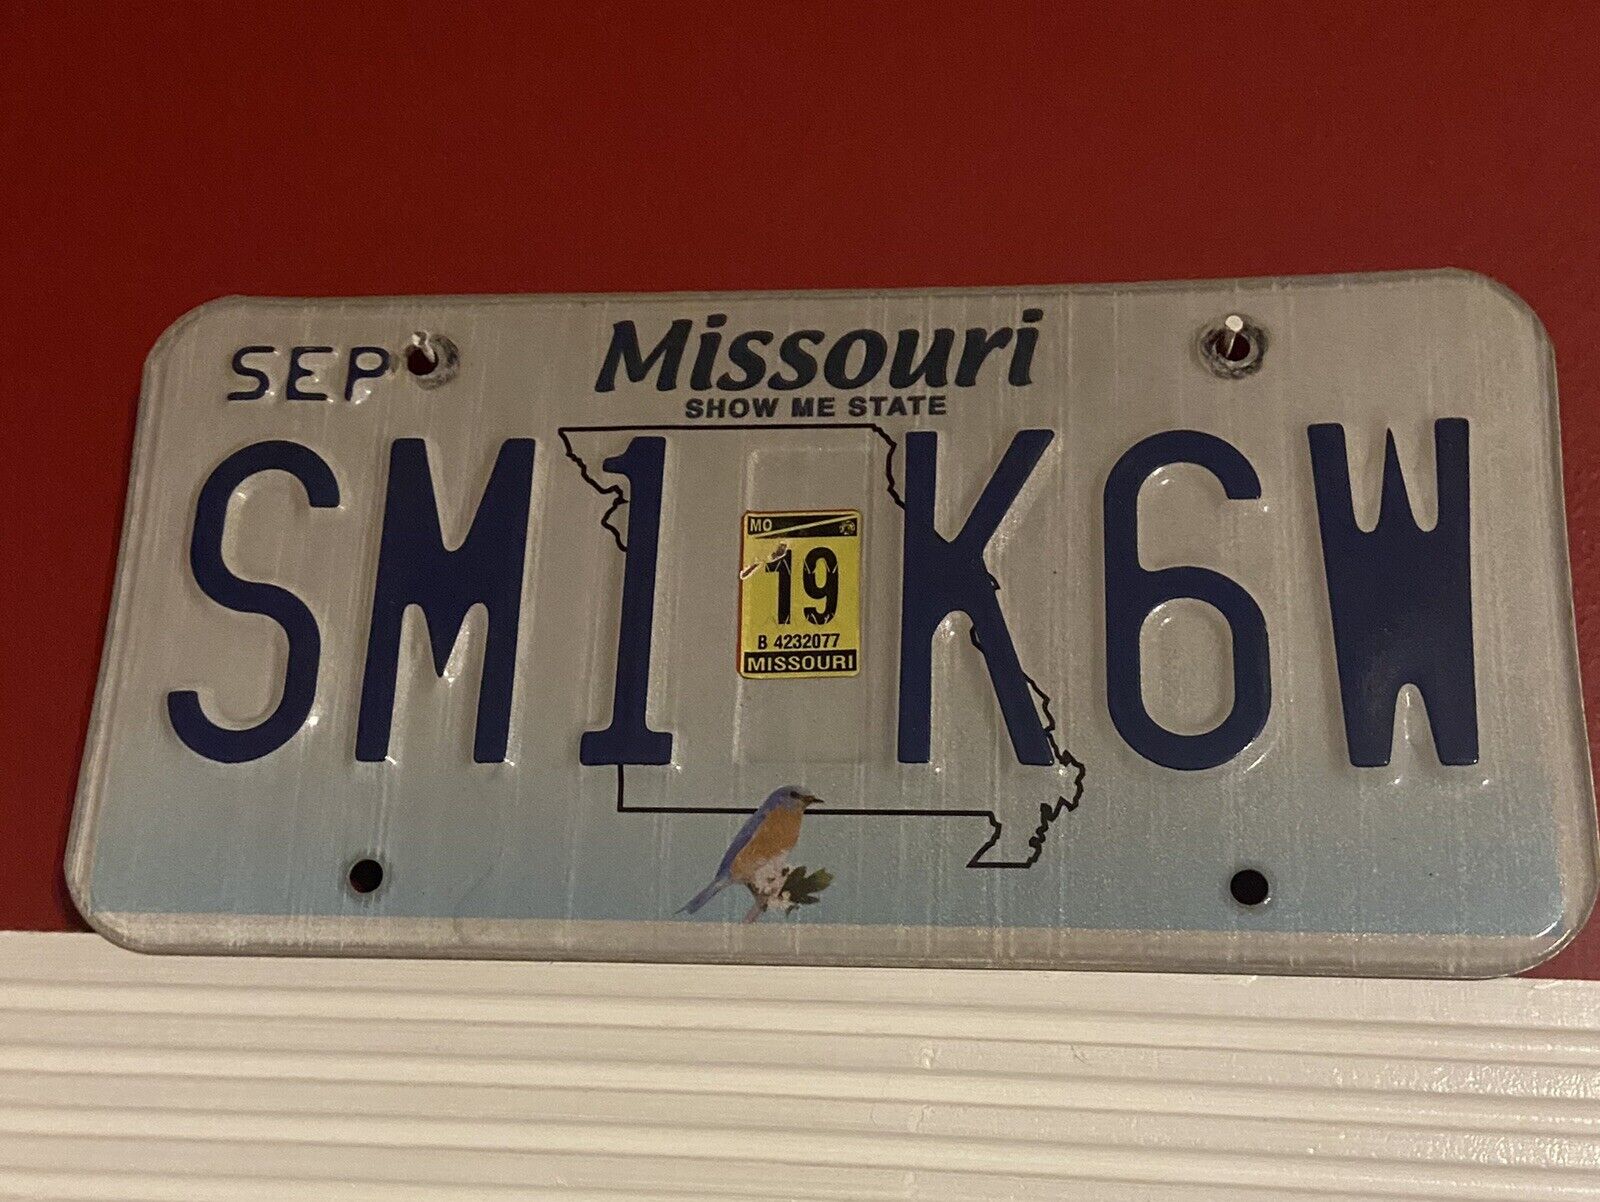 Missouri 2019 Show Me State license plate used